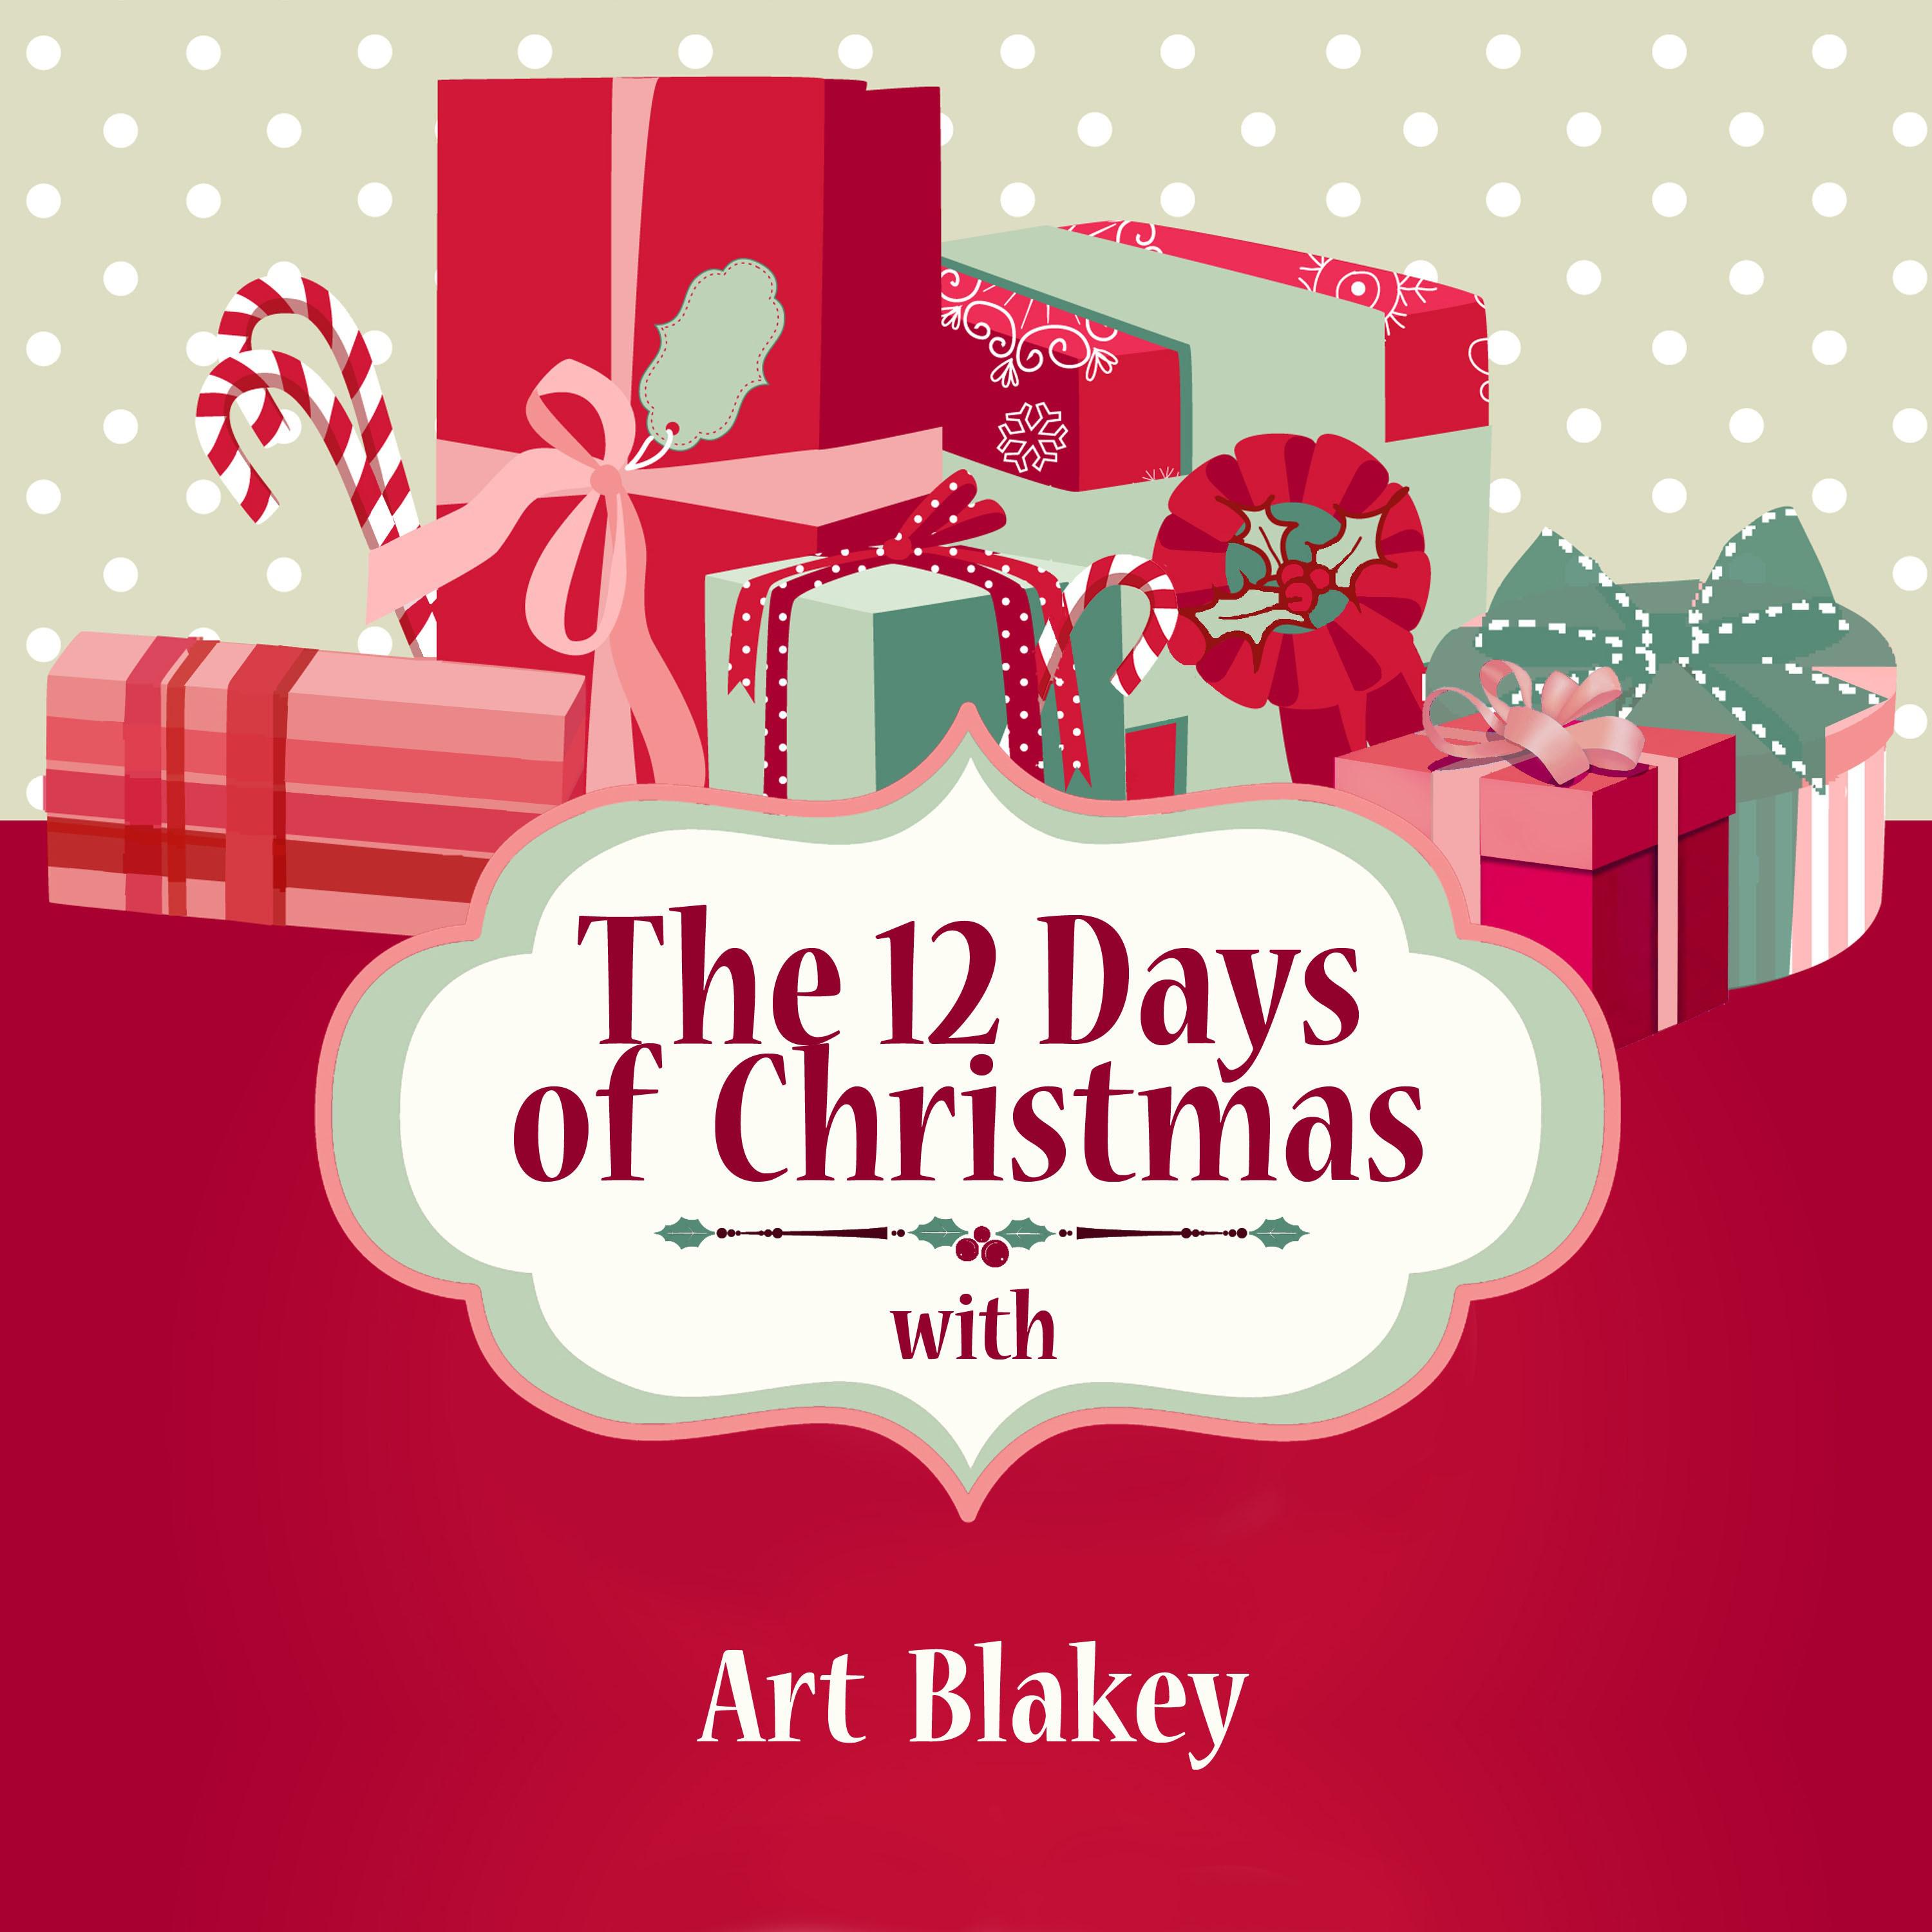 The 12 Days of Christmas with Art Blakey